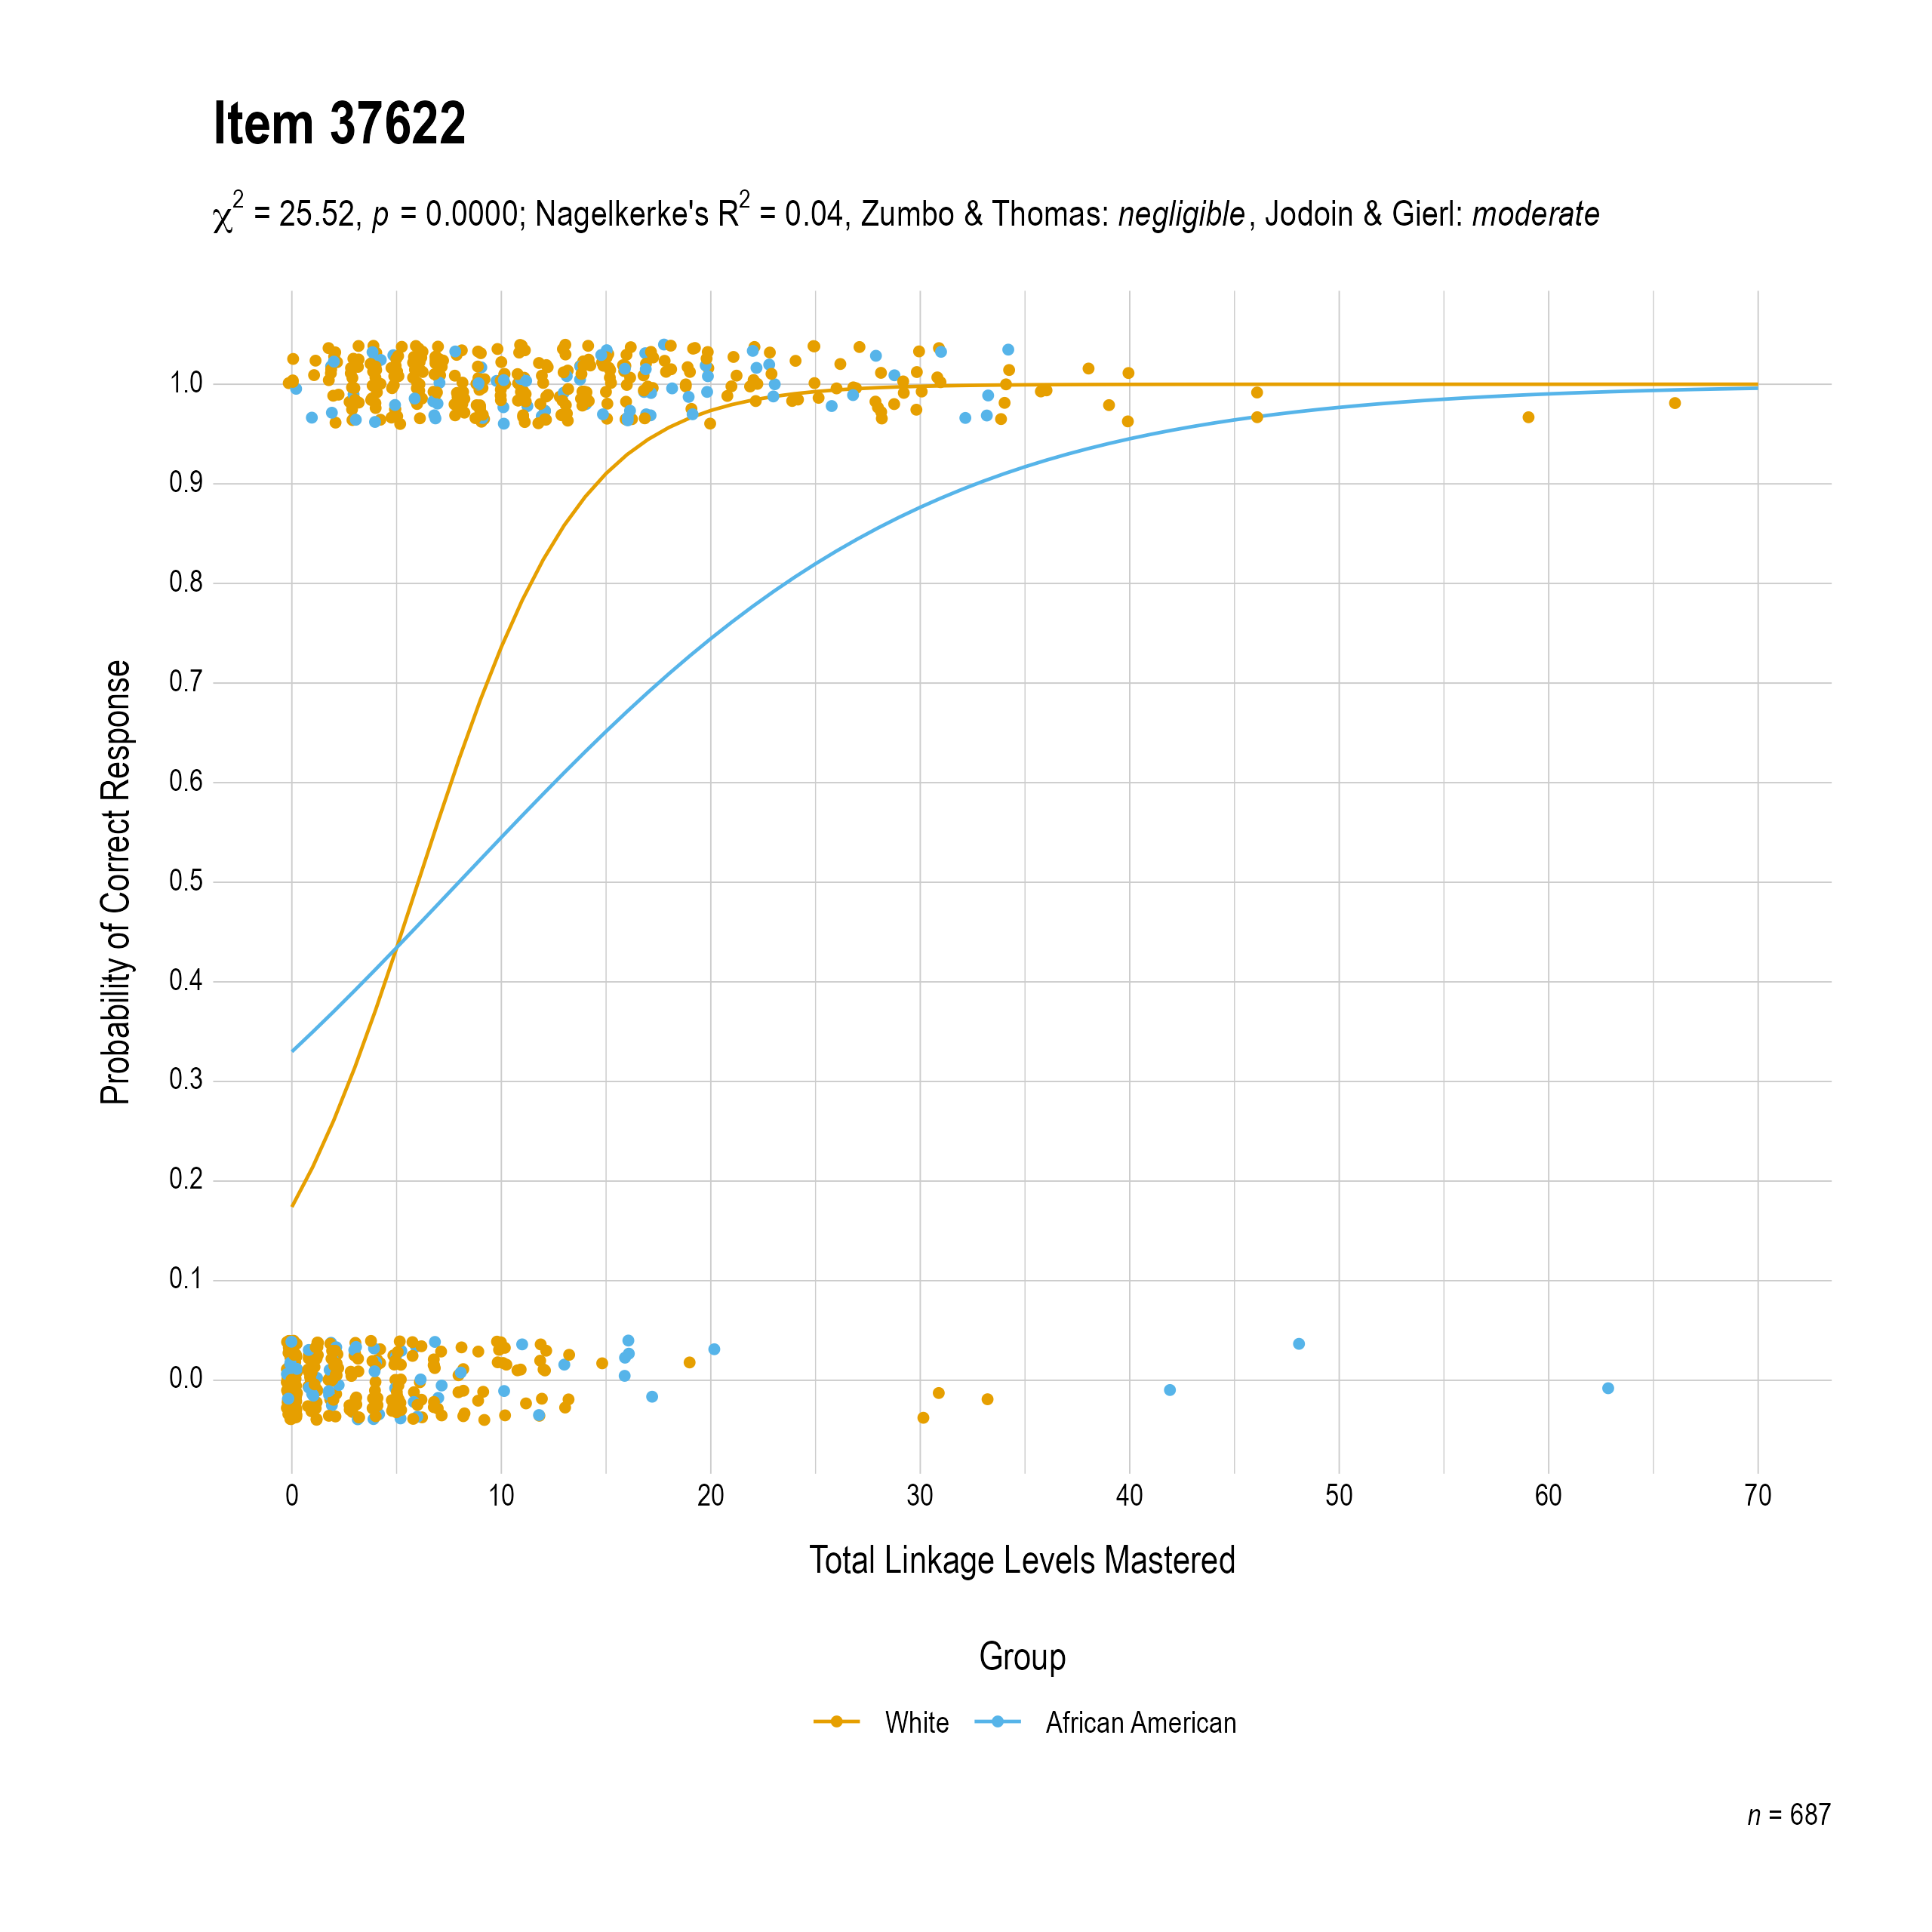 The plot of the combined race differential item function evidence for English language arts item 37622. The figure contains points shaded by group. The figure also contains a logistic regression curve for each group. The total linkage levels mastered in is on the x-axis, and the probability of a correct response is on the y-axis.